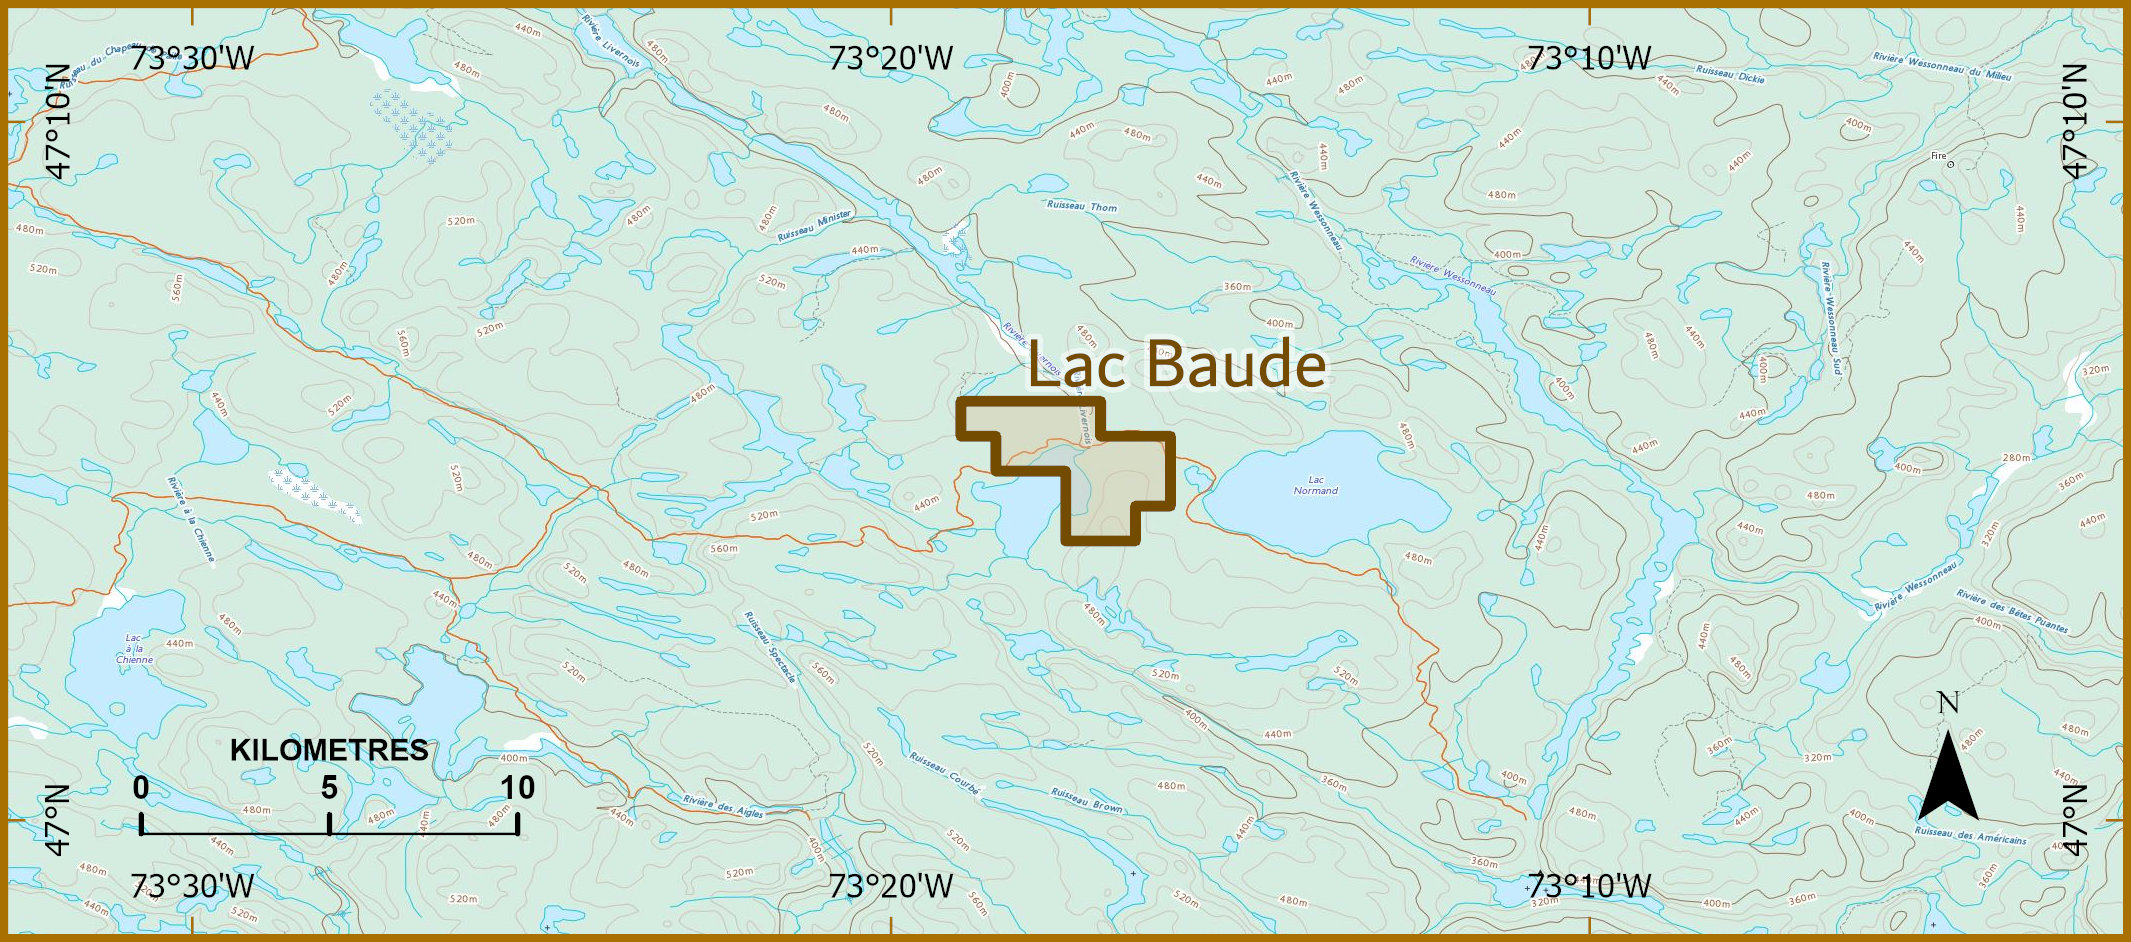 Detailed Map showing Project Lac Baude